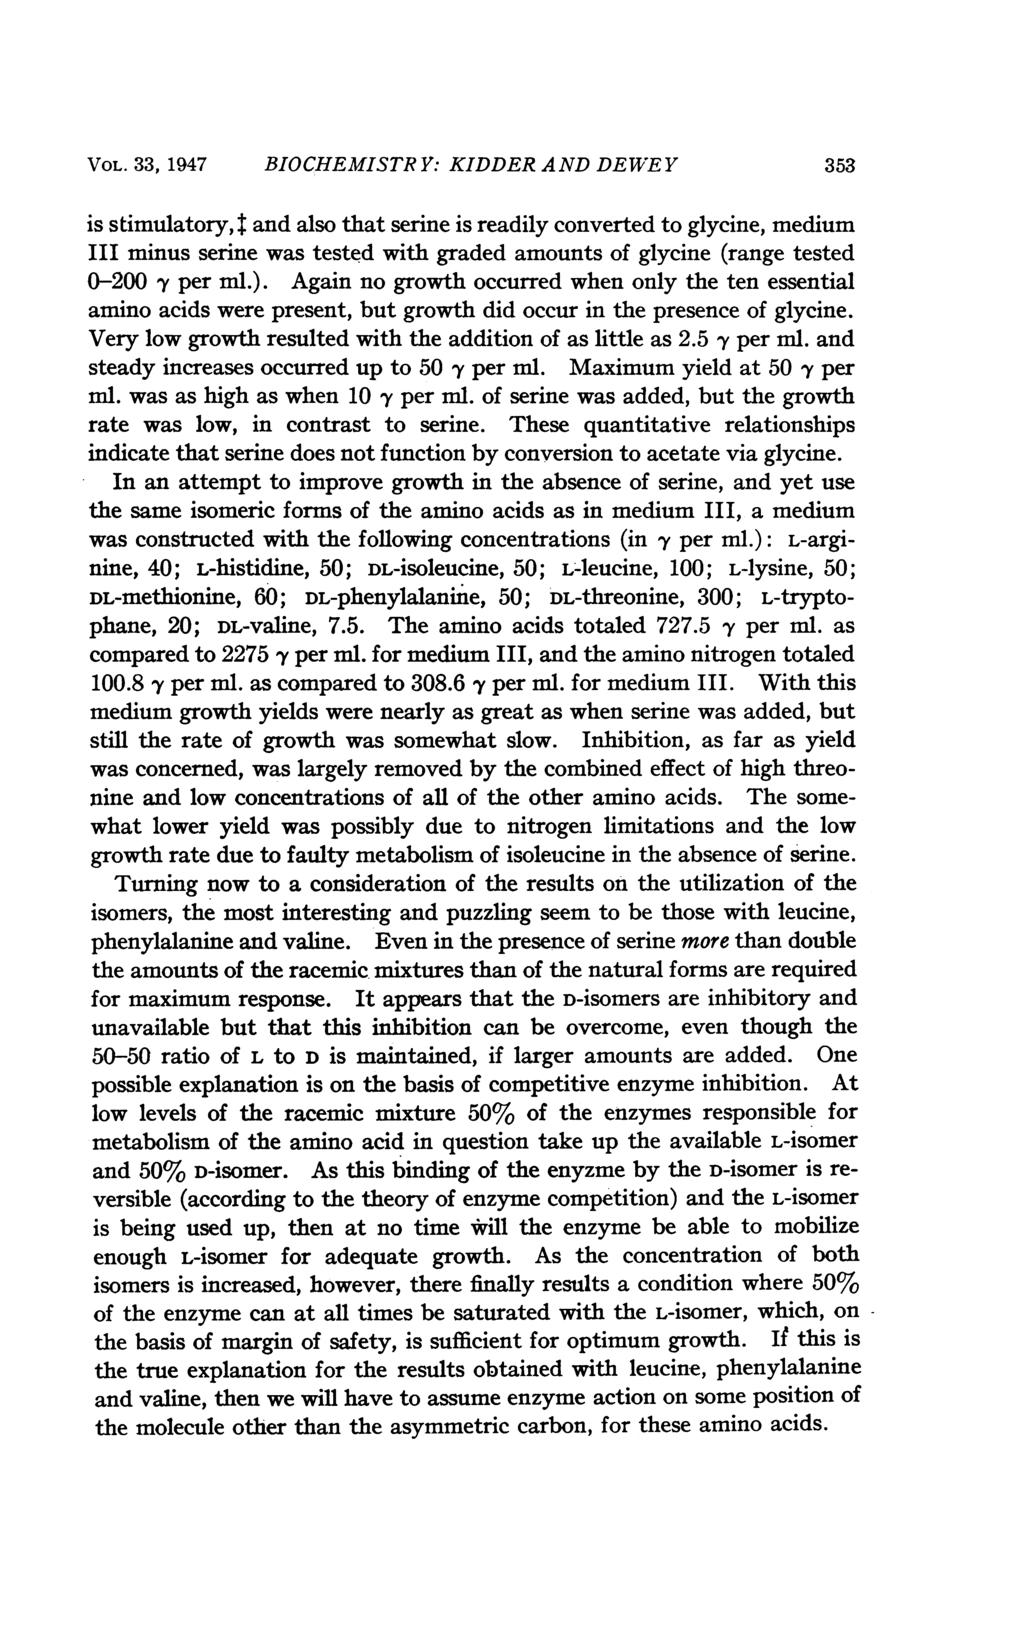 VOL. 33, 1947 BIOCHEMISTRY: KIDDER AND DEWEY 353 is stimulatory, t and also that serine is readily converted to glycine, medium III minus serine was tested with graded amounts of glycine (range